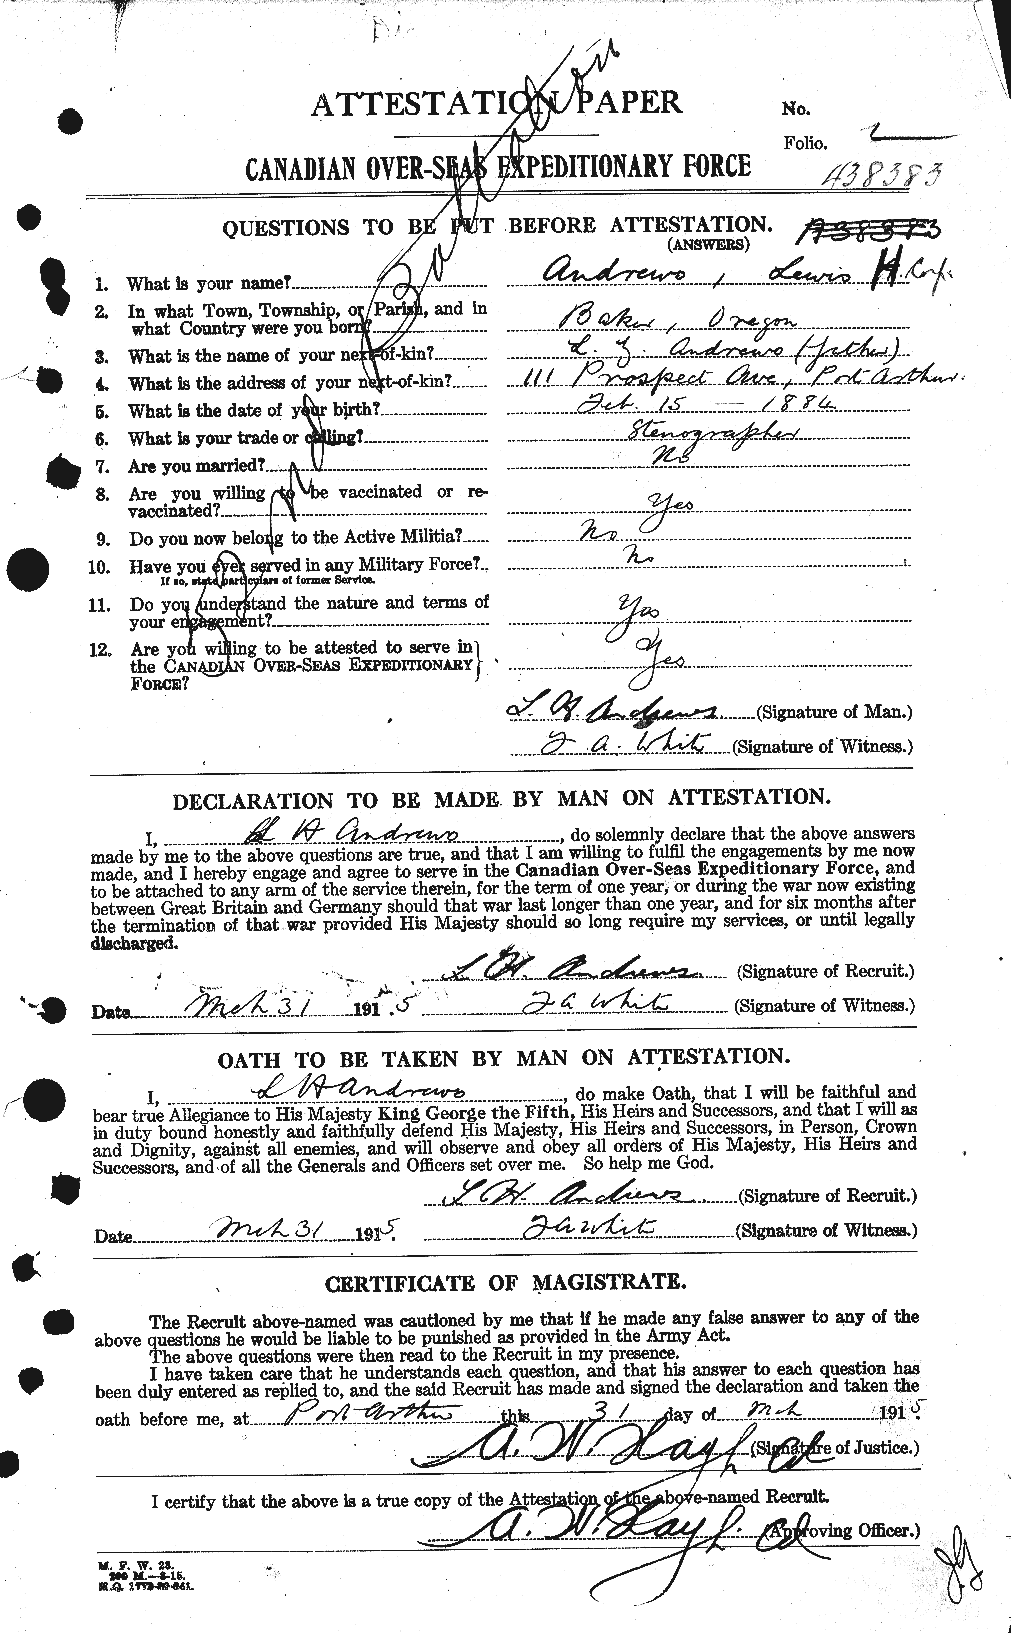 Personnel Records of the First World War - CEF 210172a